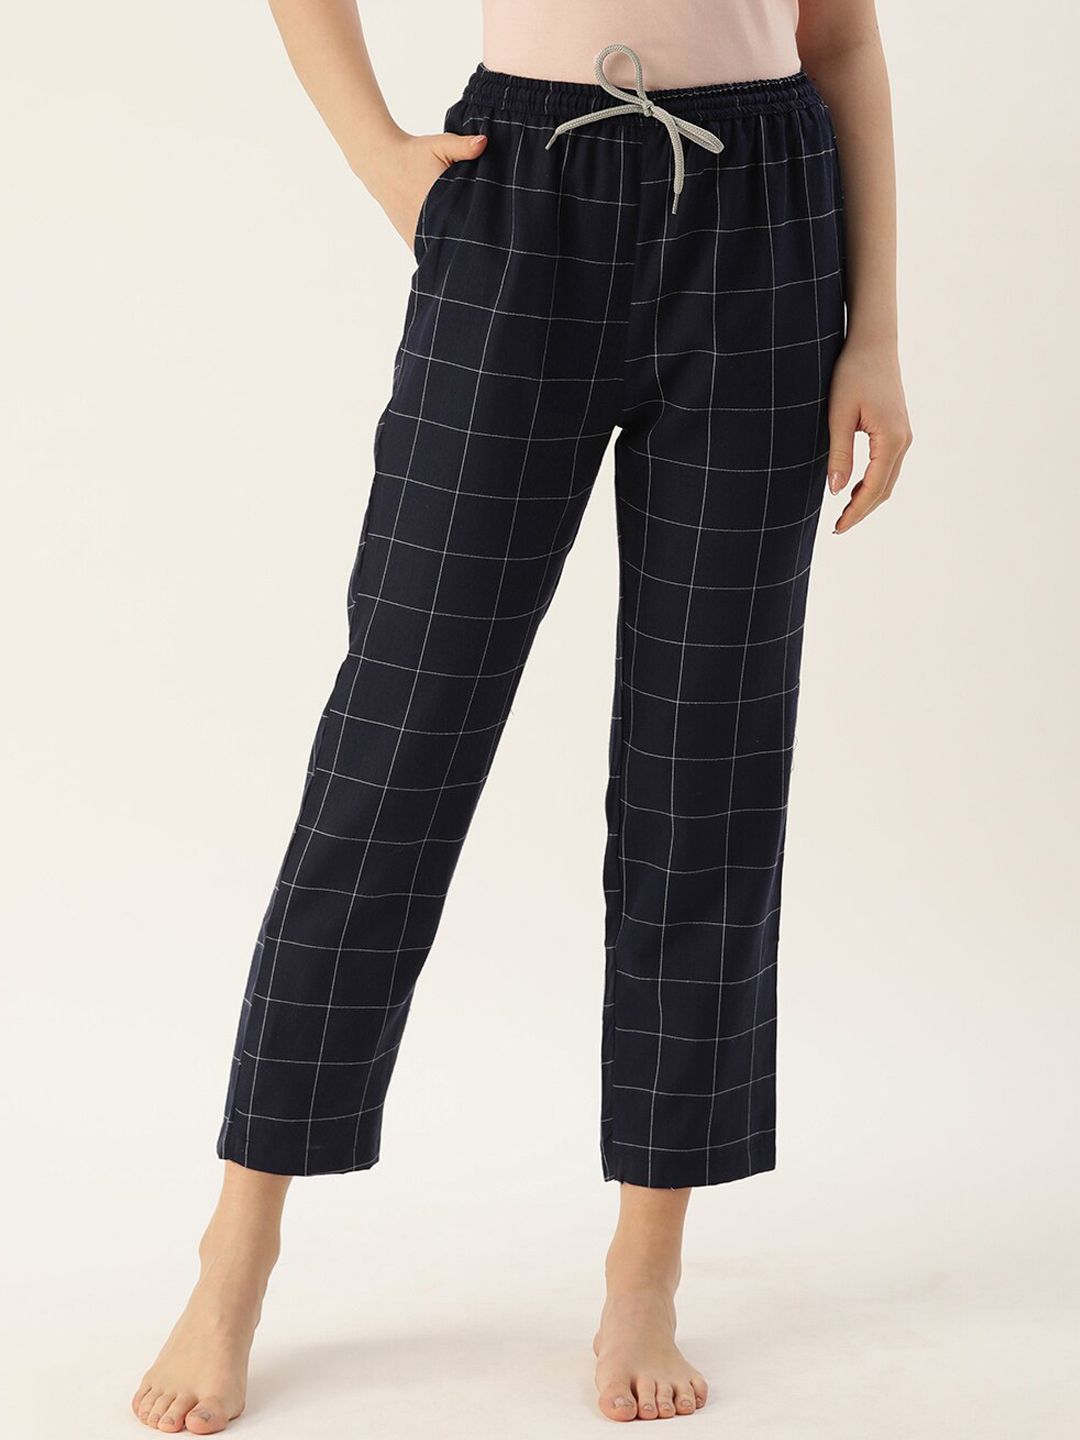 Kryptic Women Navy Blue & White Checked Lounge Pants Price in India